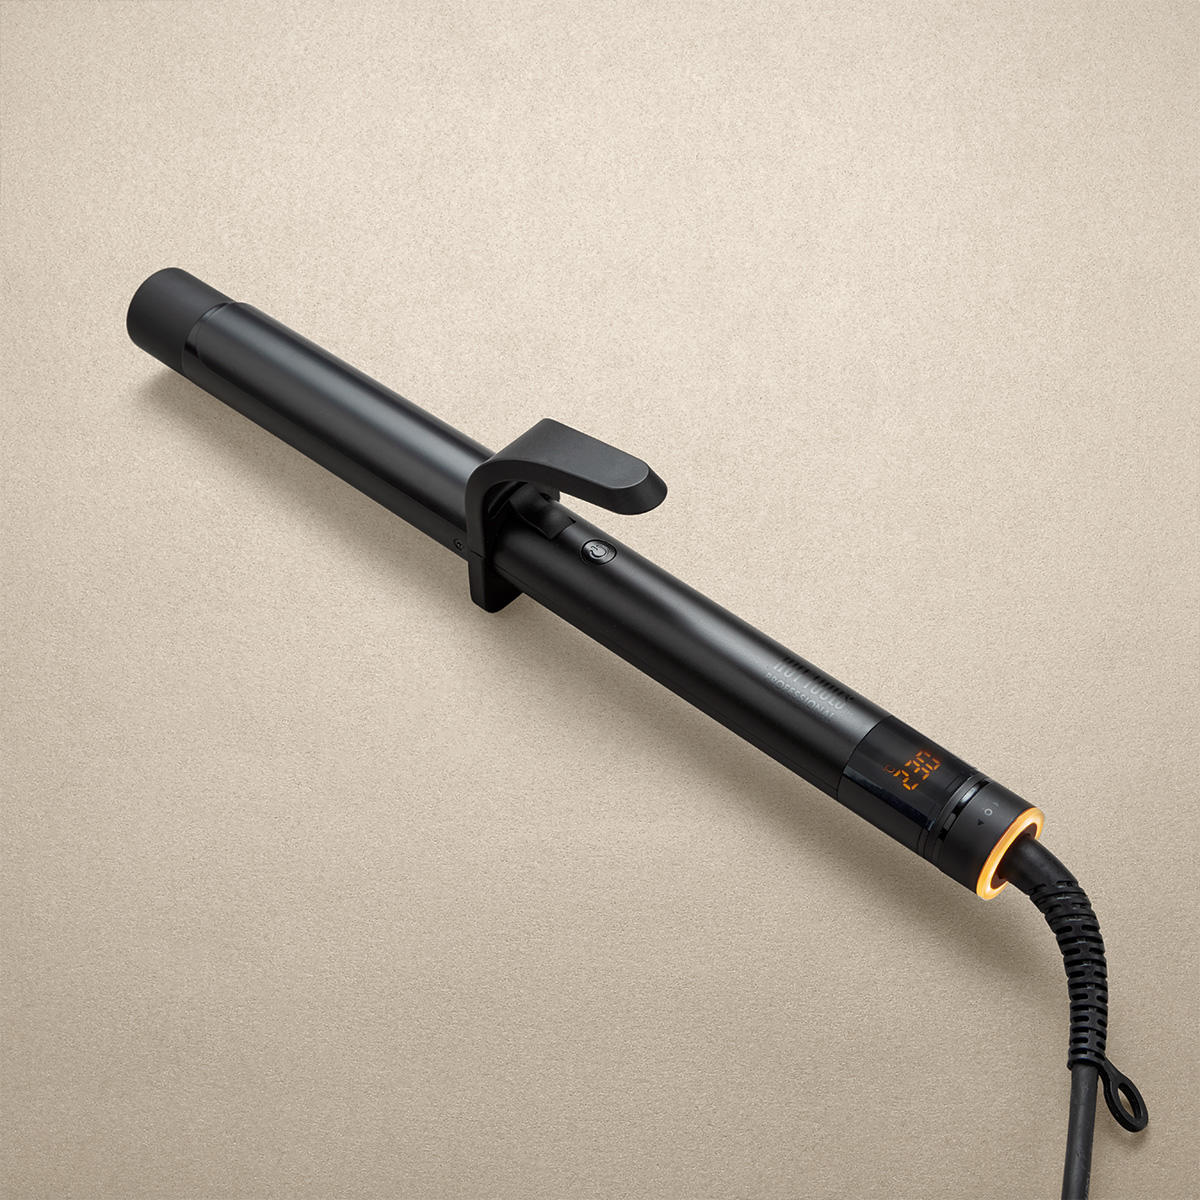 Hot Tools Black Gold Collection Digital Curling Iron 32 mm - 7